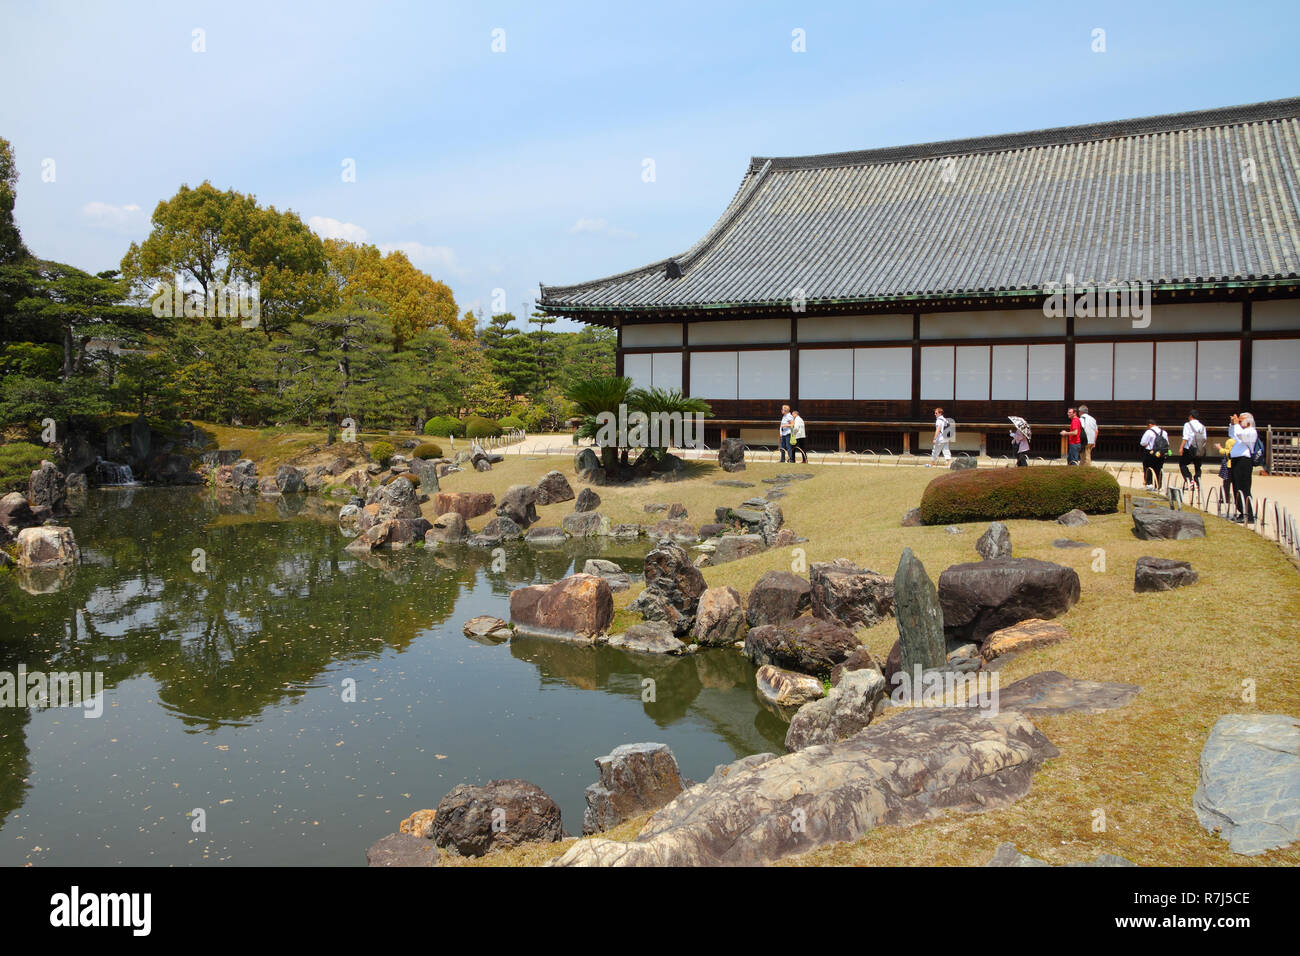 KYOTO, JAPAN - APRIL 19: Tourists visit Nijo Castle on April 19, 2012 in Kyoto, Japan. Old Kyoto is a UNESCO World Heritage site and was visited by al Stock Photo